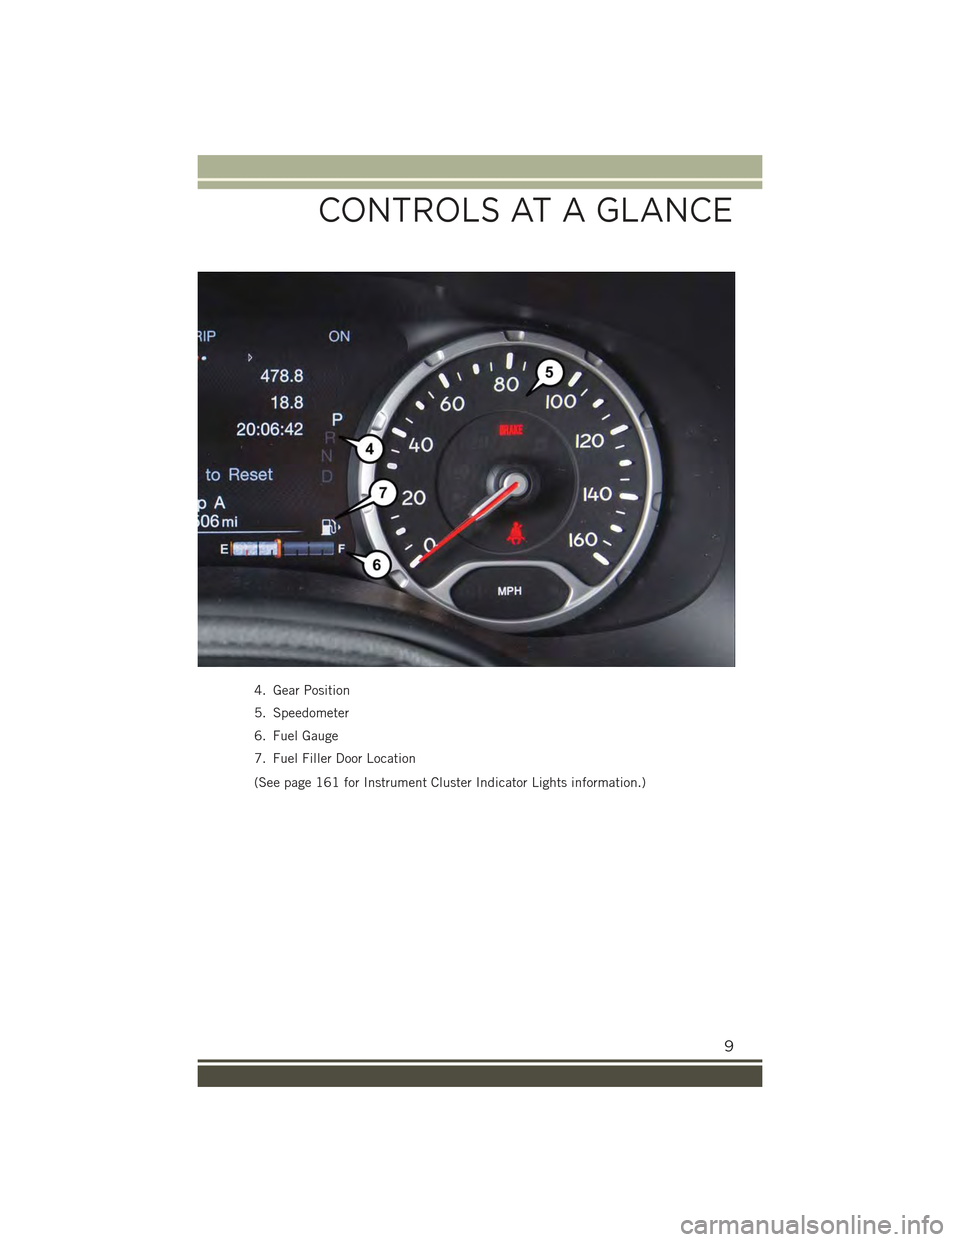 JEEP RENEGADE 2015 1.G User Guide 4. Gear Position
5. Speedometer
6. Fuel Gauge
7. Fuel Filler Door Location
(See page 161 for Instrument Cluster Indicator Lights information.)
CONTROLS AT A GLANCE
9 